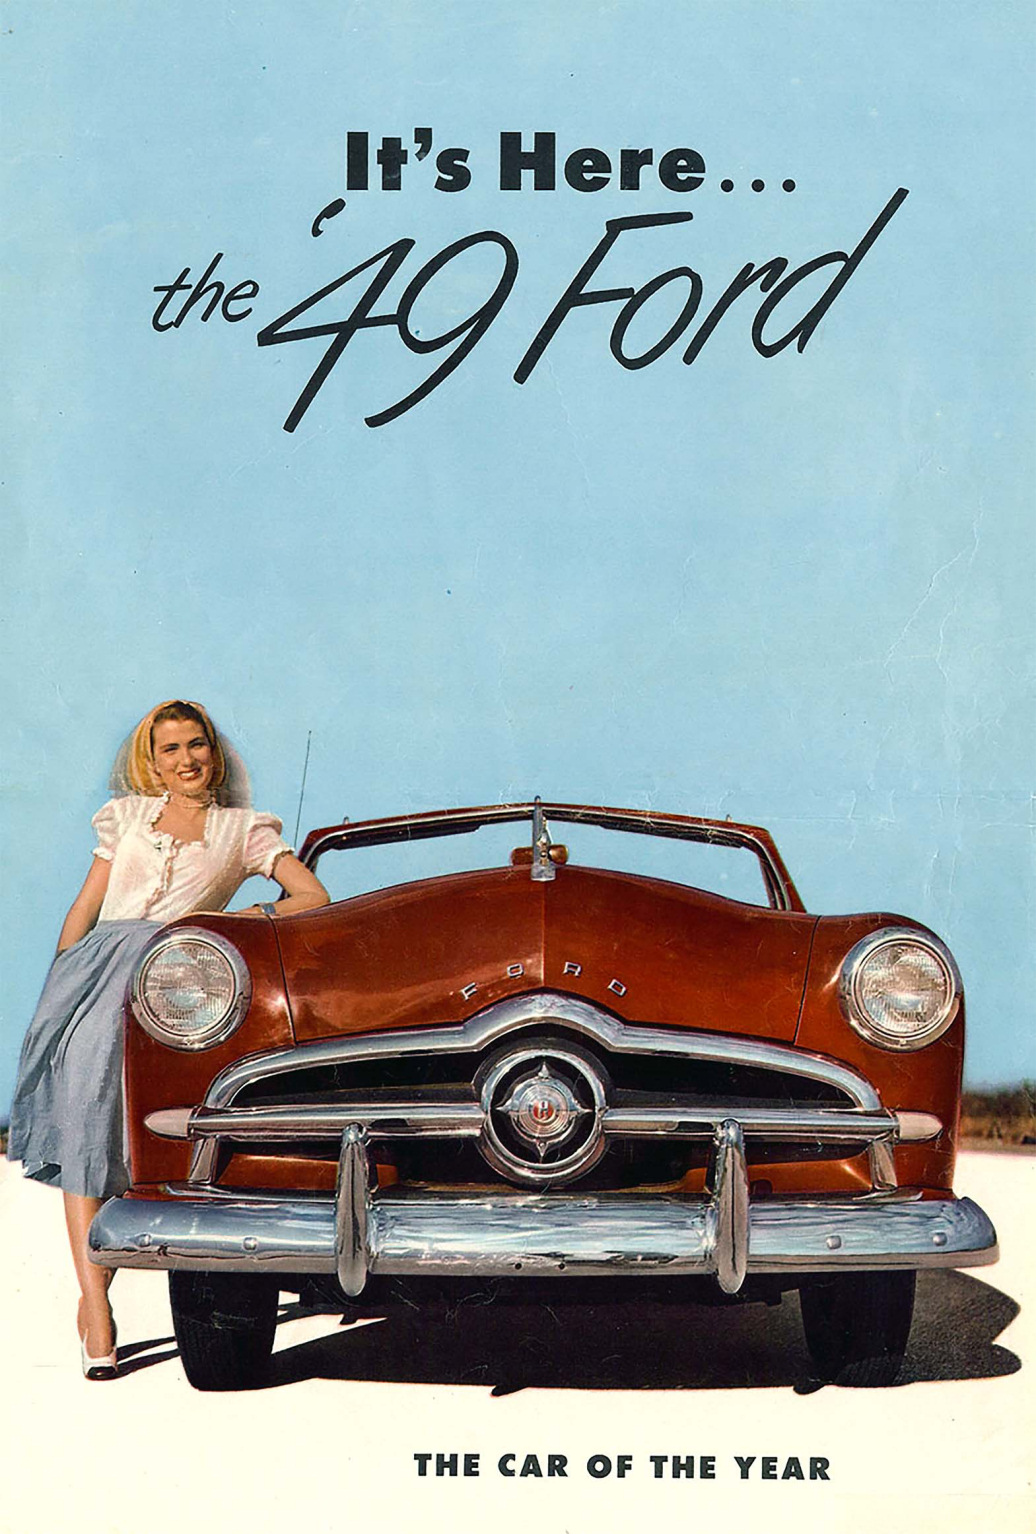 1949_Ford-Its_Here-01